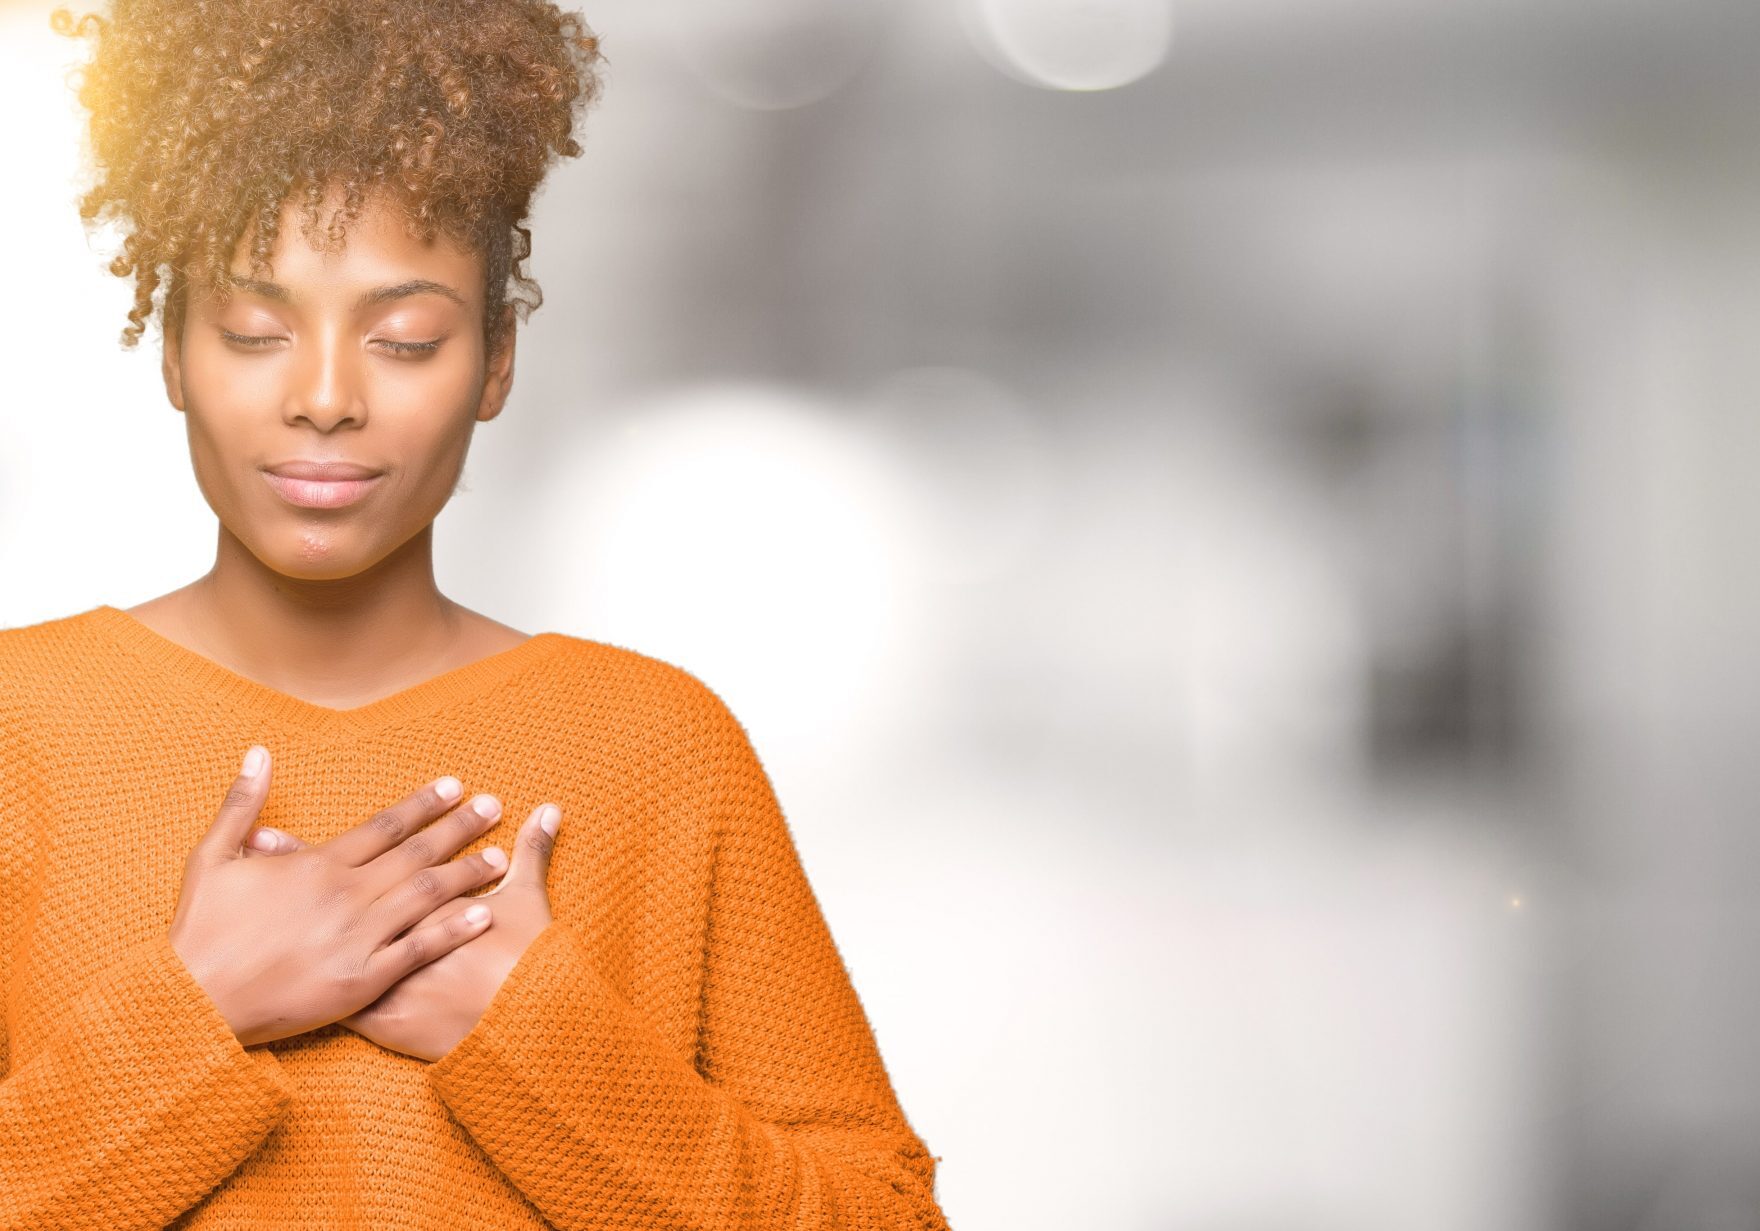 Woman wearing an orange sweater putting her hands over her heart